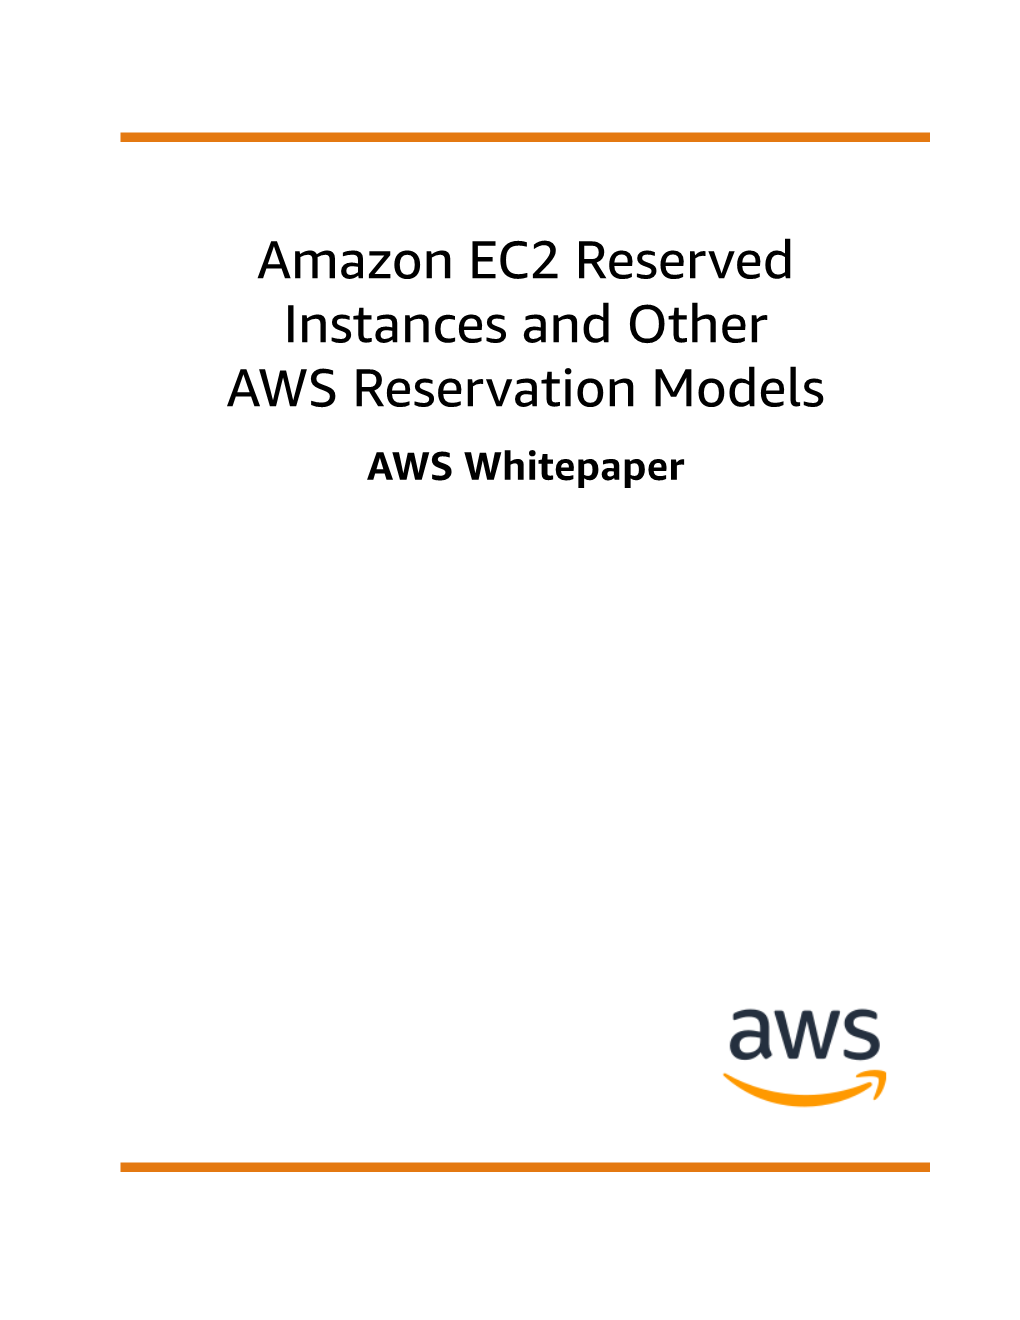 Amazon EC2 Reserved Instances and Other AWS Reservation Models AWS Whitepaper Amazon EC2 Reserved Instances and Other AWS Reservation Models AWS Whitepaper